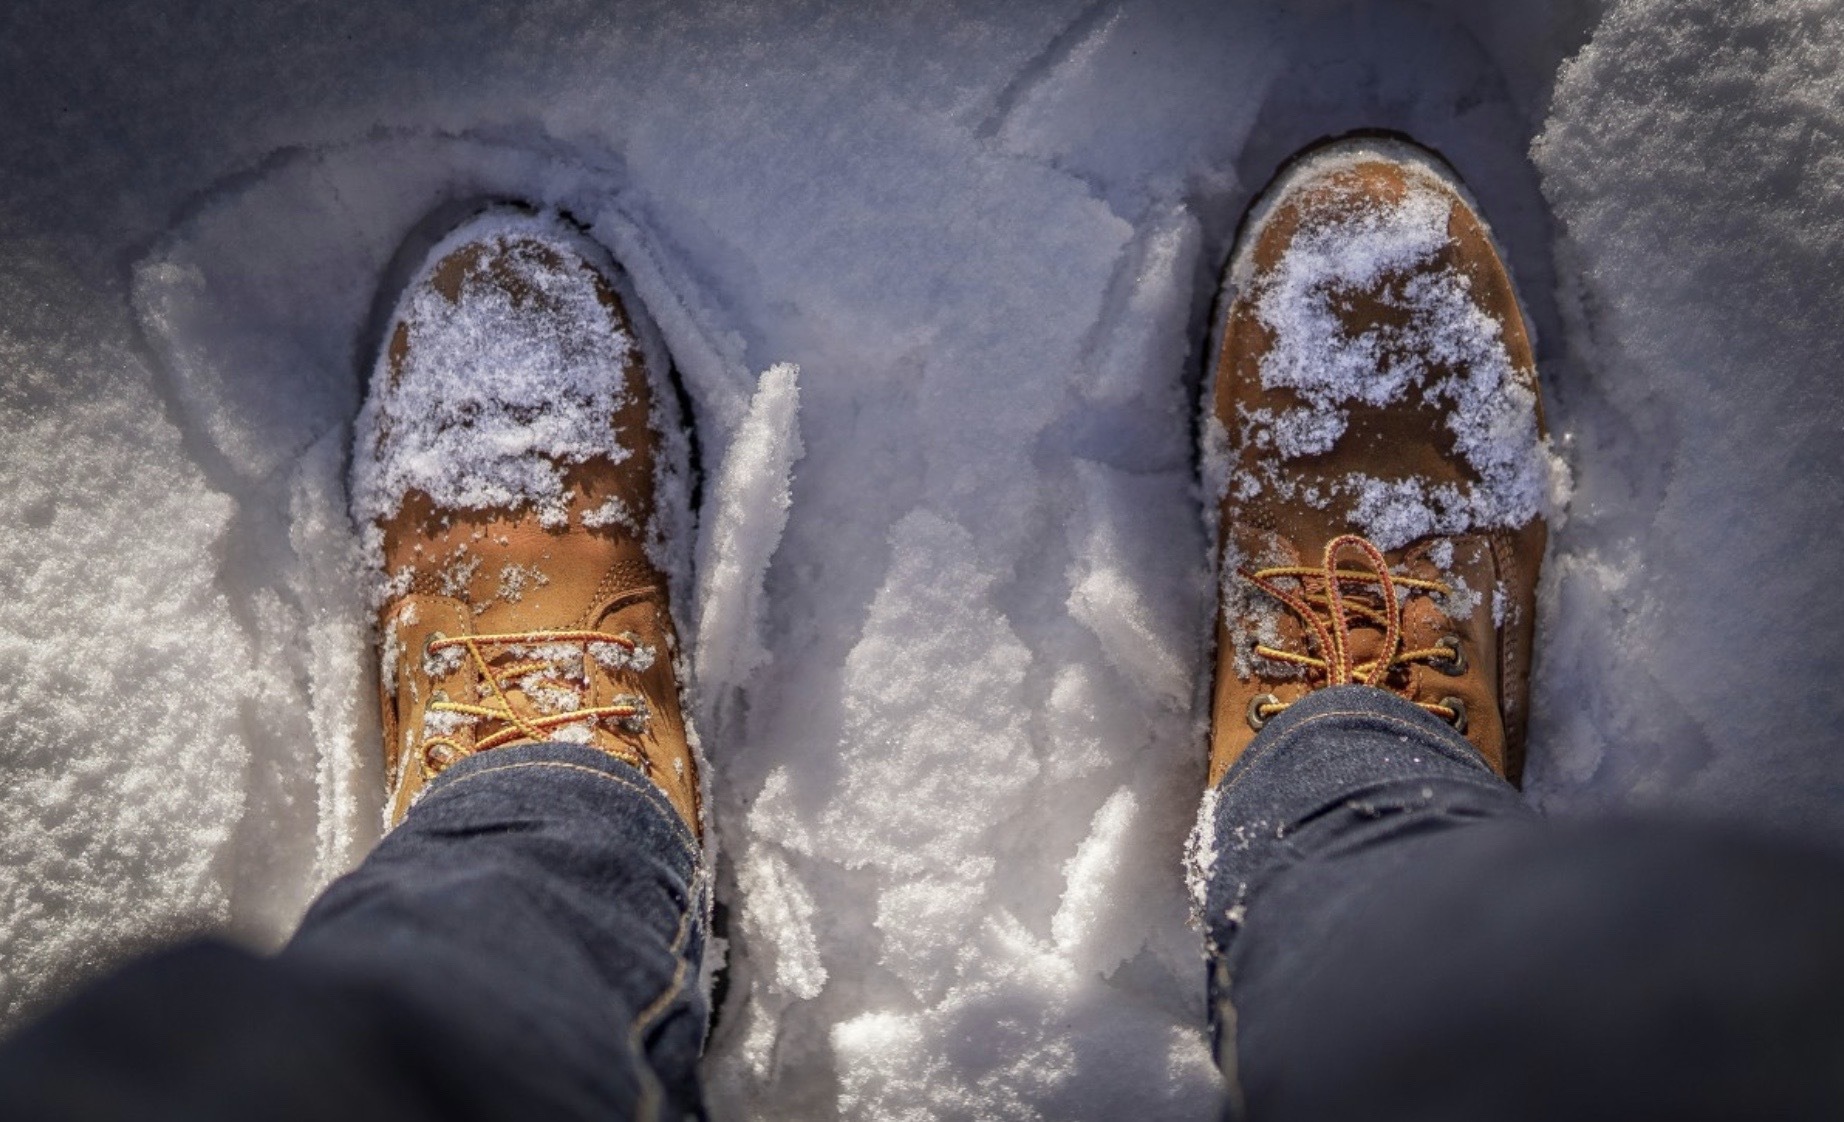 are timberland boots good for walking